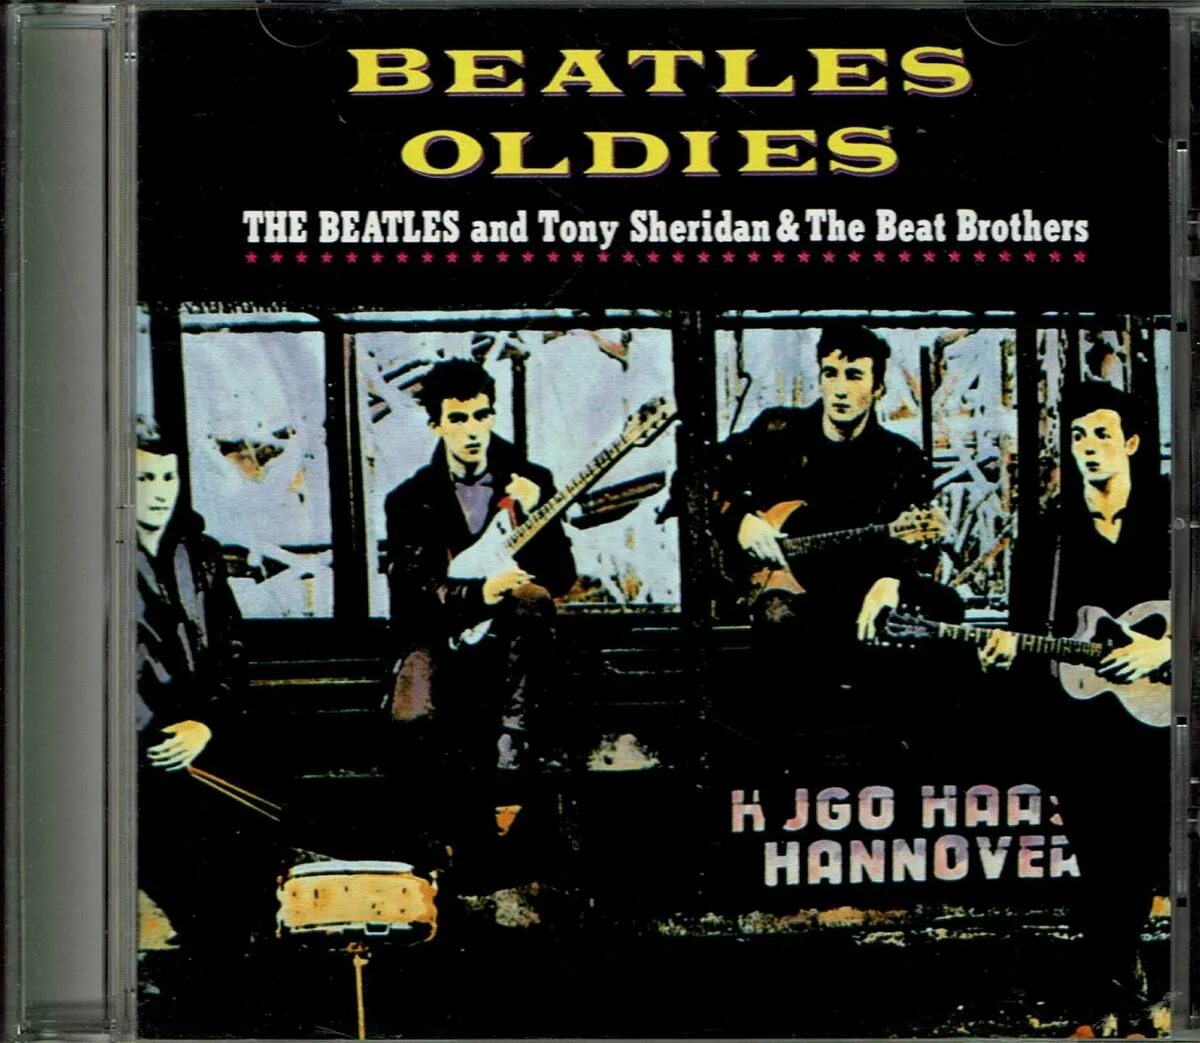 Tony Sheridan and the Beatles. Beatles with Tony Sheridan. The Beatles' first Тони Шеридан. Фото Beatles with Tony Sheridan. Beat brothers